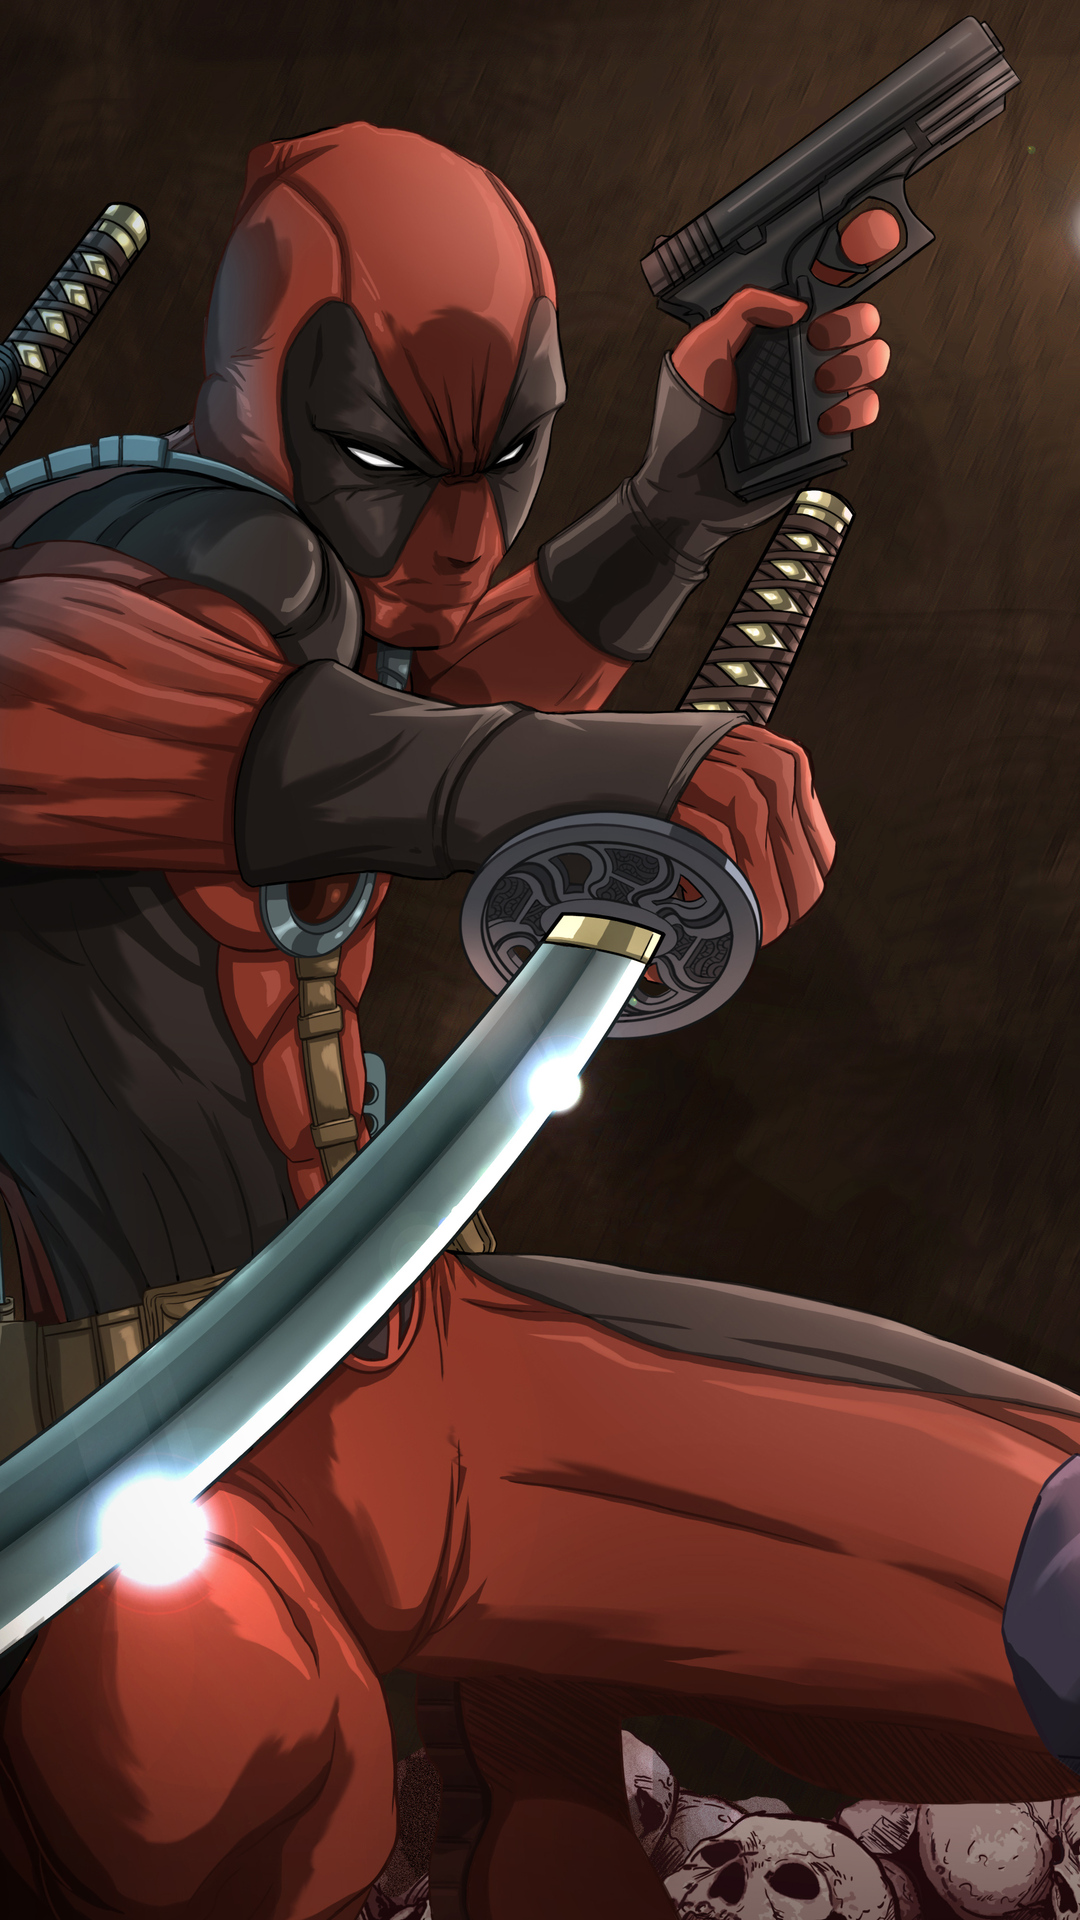 Deadpool Vs Deathstroke 4k iPhone 6s, 6 Plus, Pixel xl , One Plus 3t, 5 HD 4k Wallpaper, Image, Background, Photo and Picture